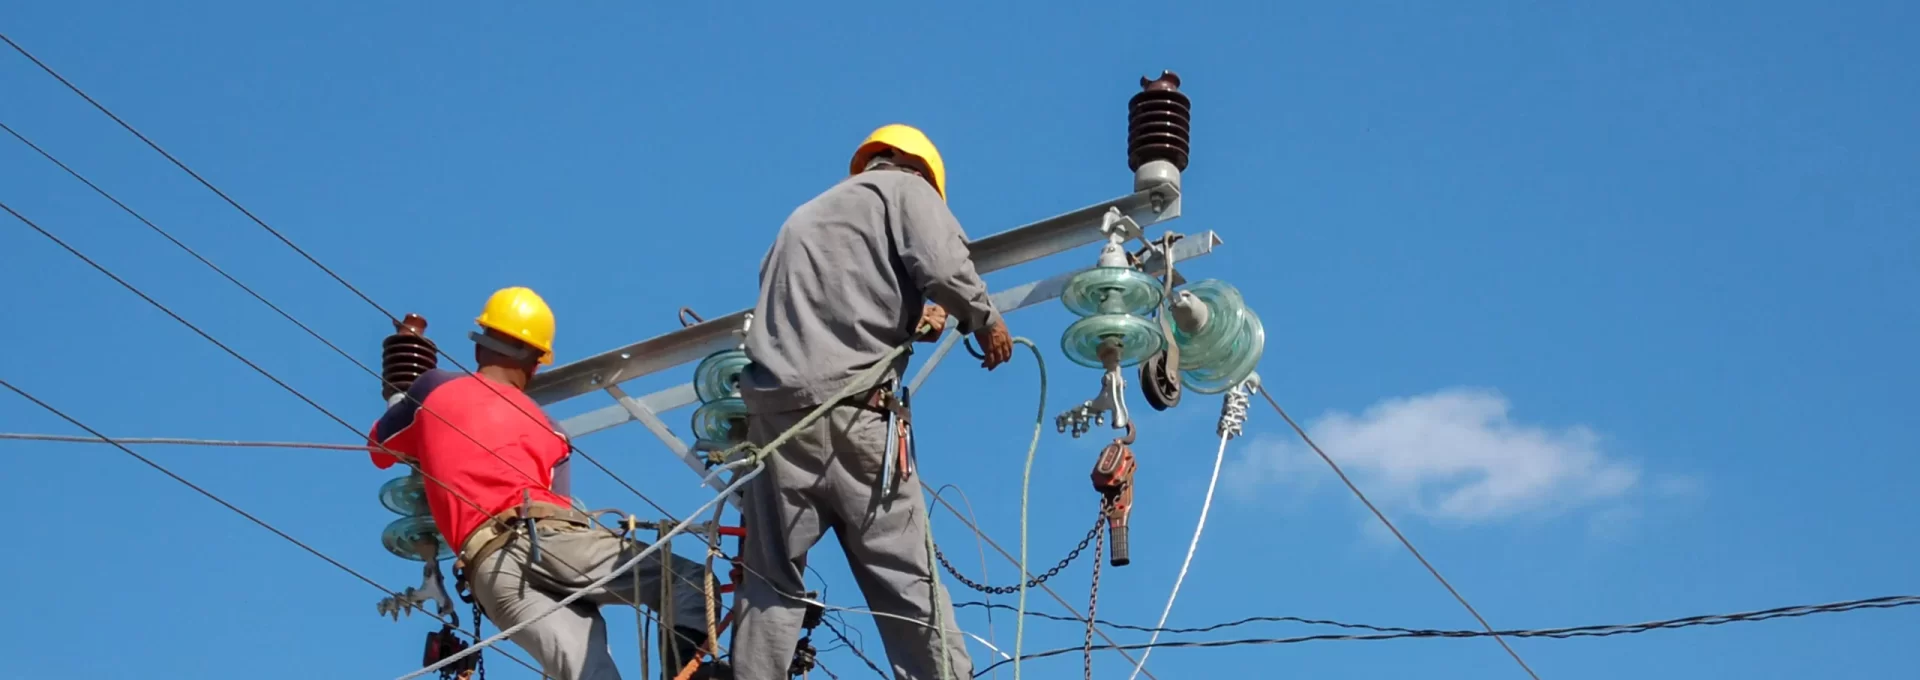 COMMERCIAL ELECTRICAL CONTRACTORS IN INDIA